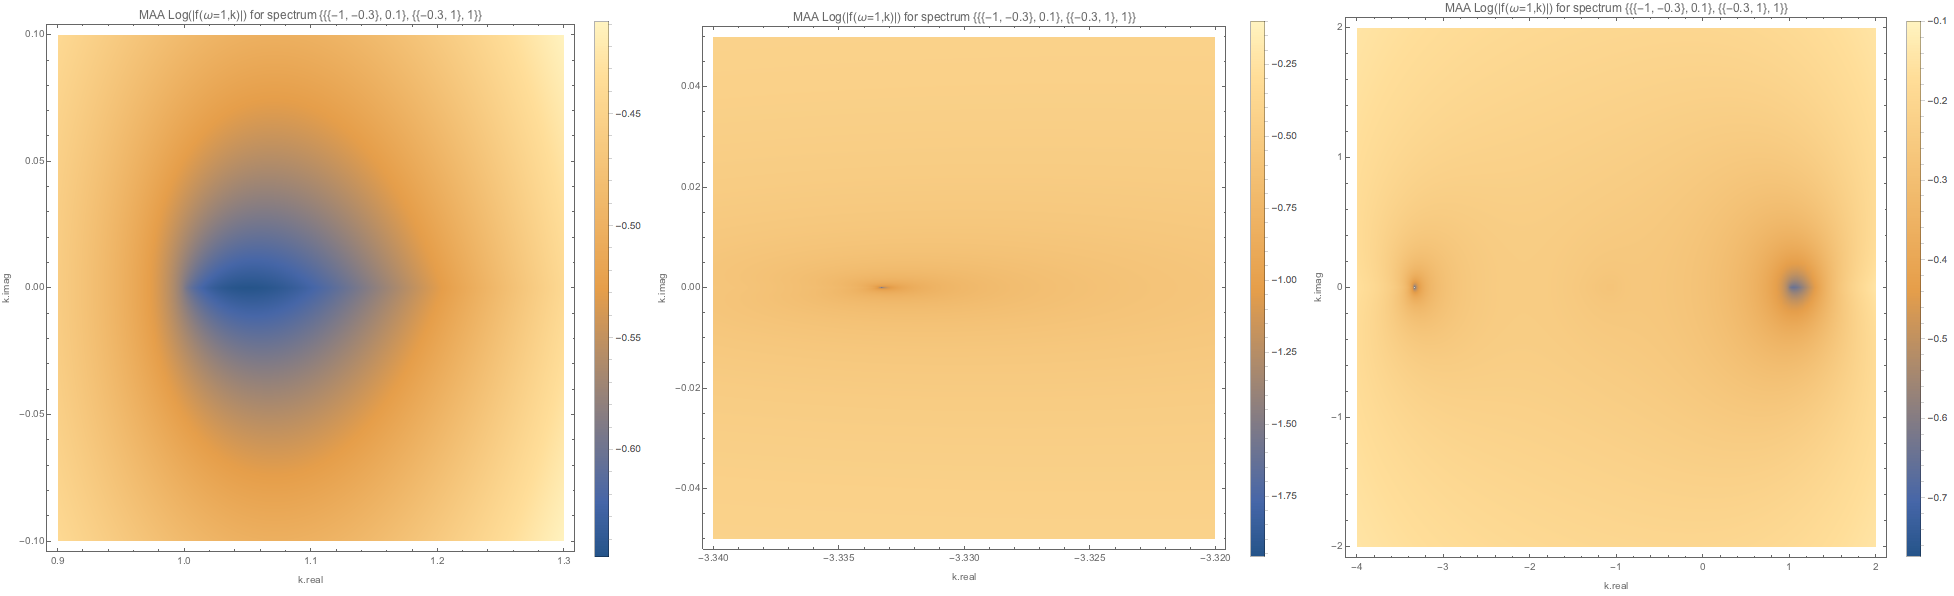 ../../_images/f-of-omega-1-and-k-densityplot-log-maa-spectwc3.png